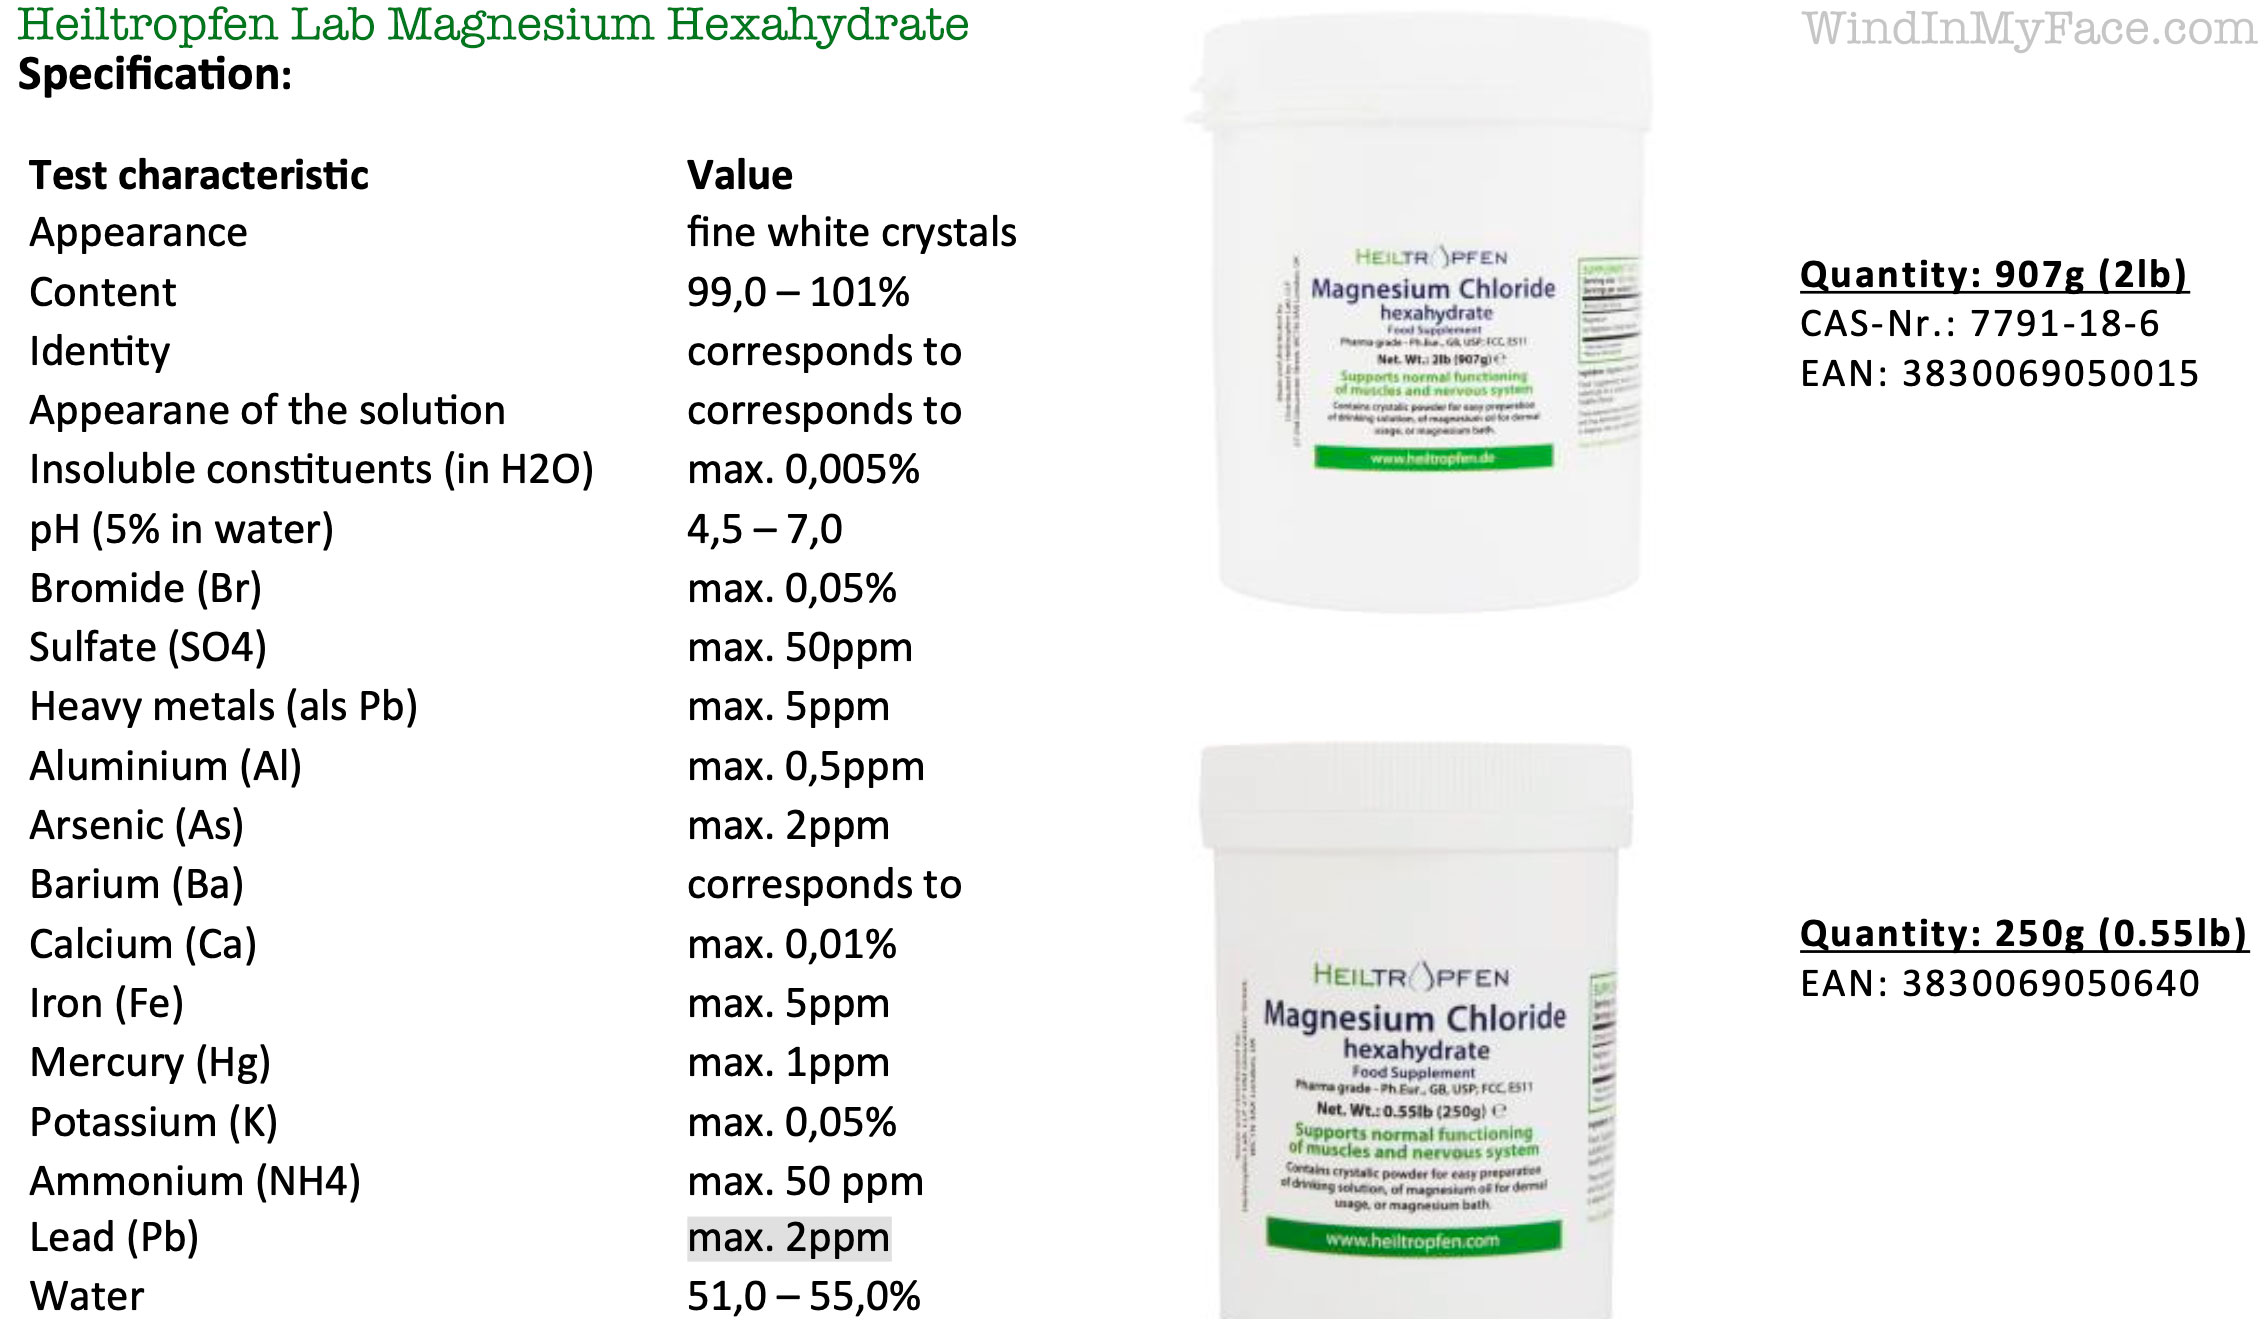 Specifications for Heiltropfen Lab Magnesium Chloride Hexahydrate